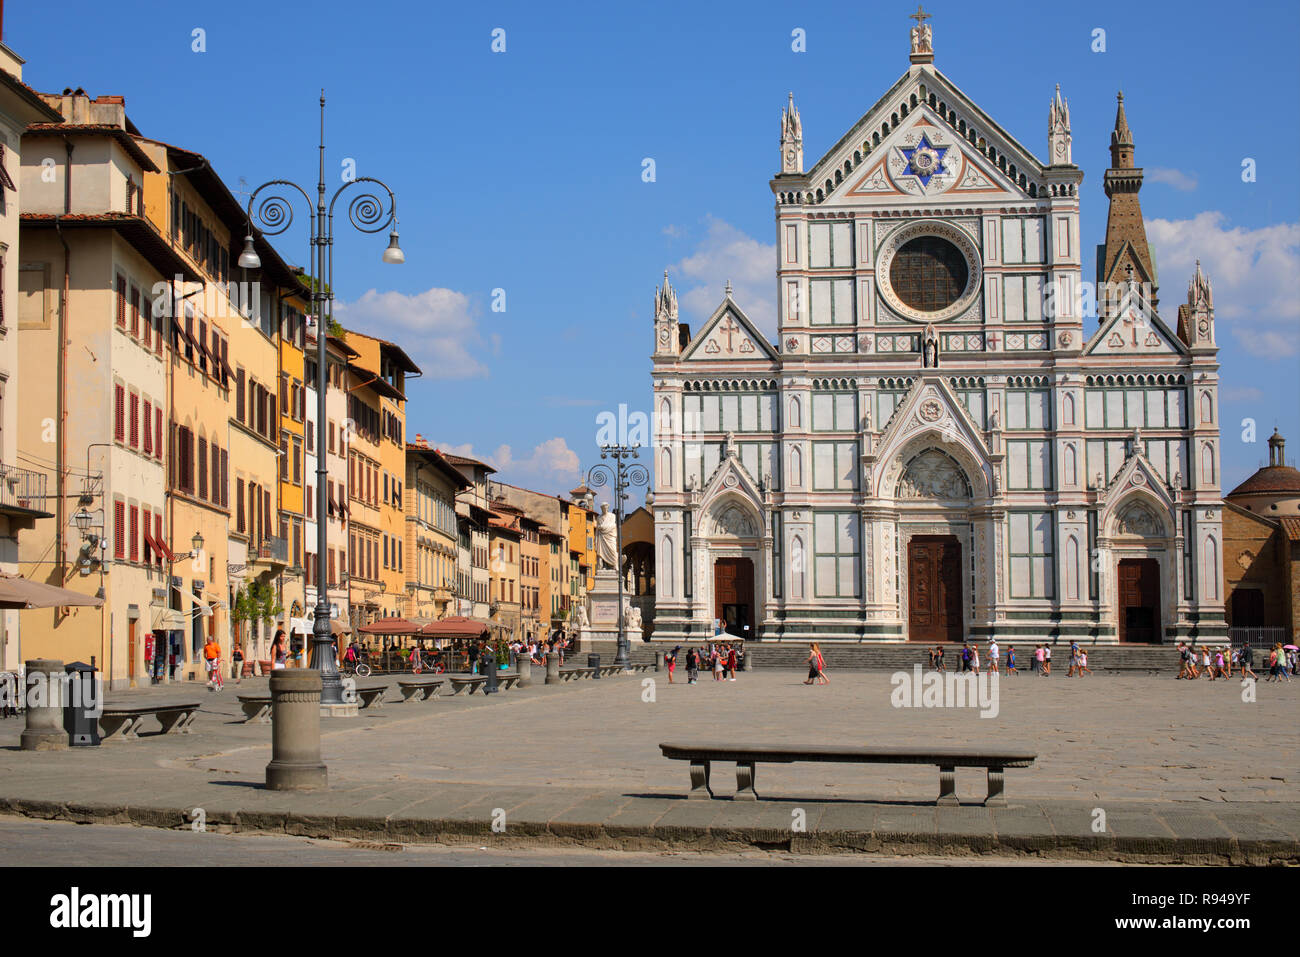 Florence, Italy - August 9, 2018: People on the square in front of Basilica di Santa Croce. It is the burial place of some of the most illustrious Ita Stock Photo